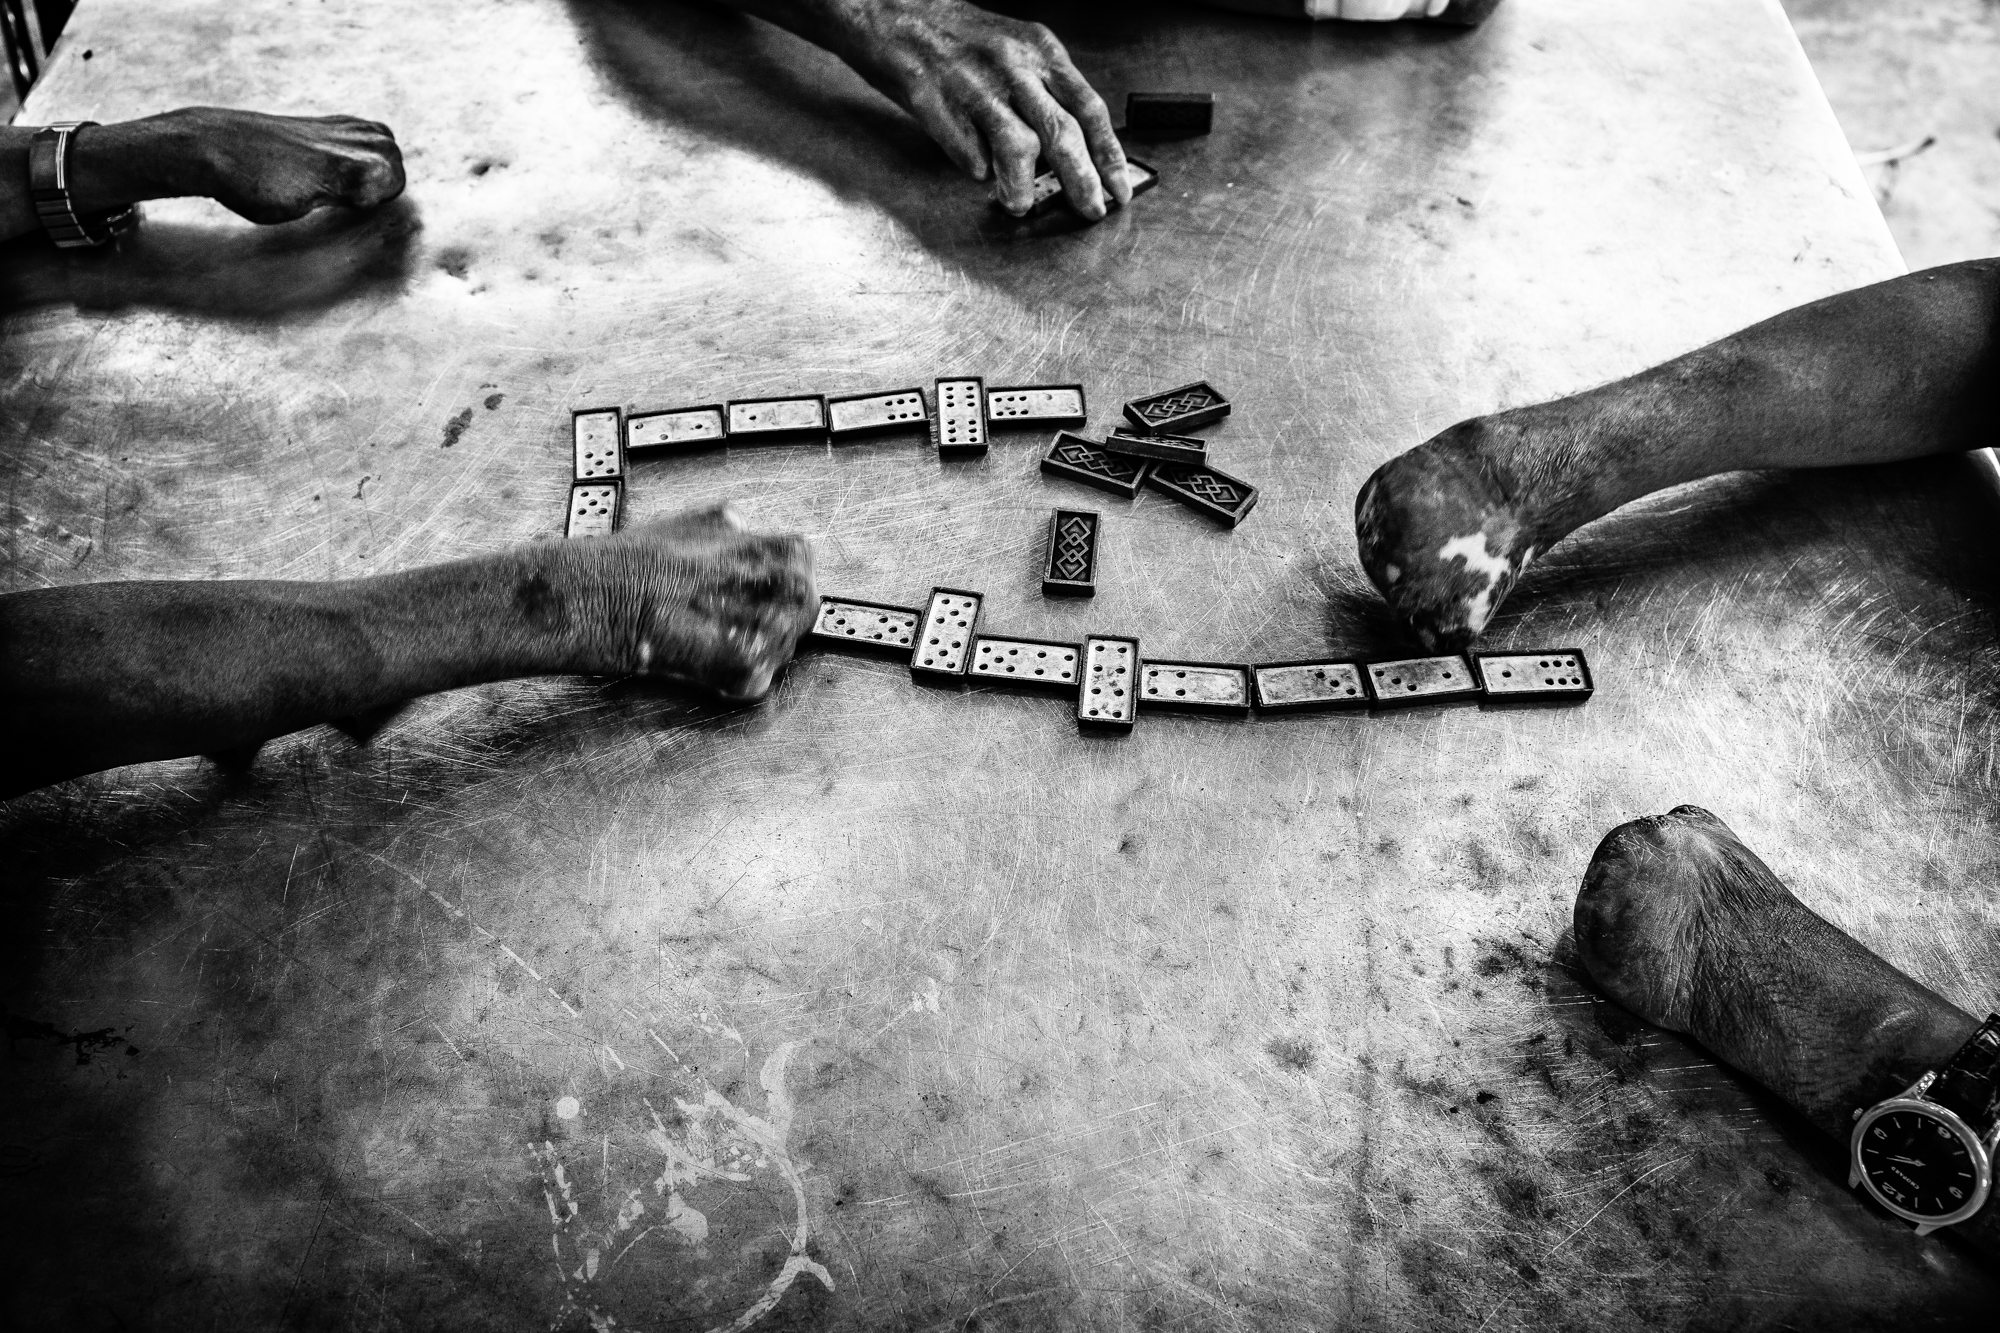 Resident patients at Ben San leprosy center, near Saigon, Vietnam, spend their days playing dominos, which they do with ease and skill, despite their loss of digits, a common syptom of the disease.